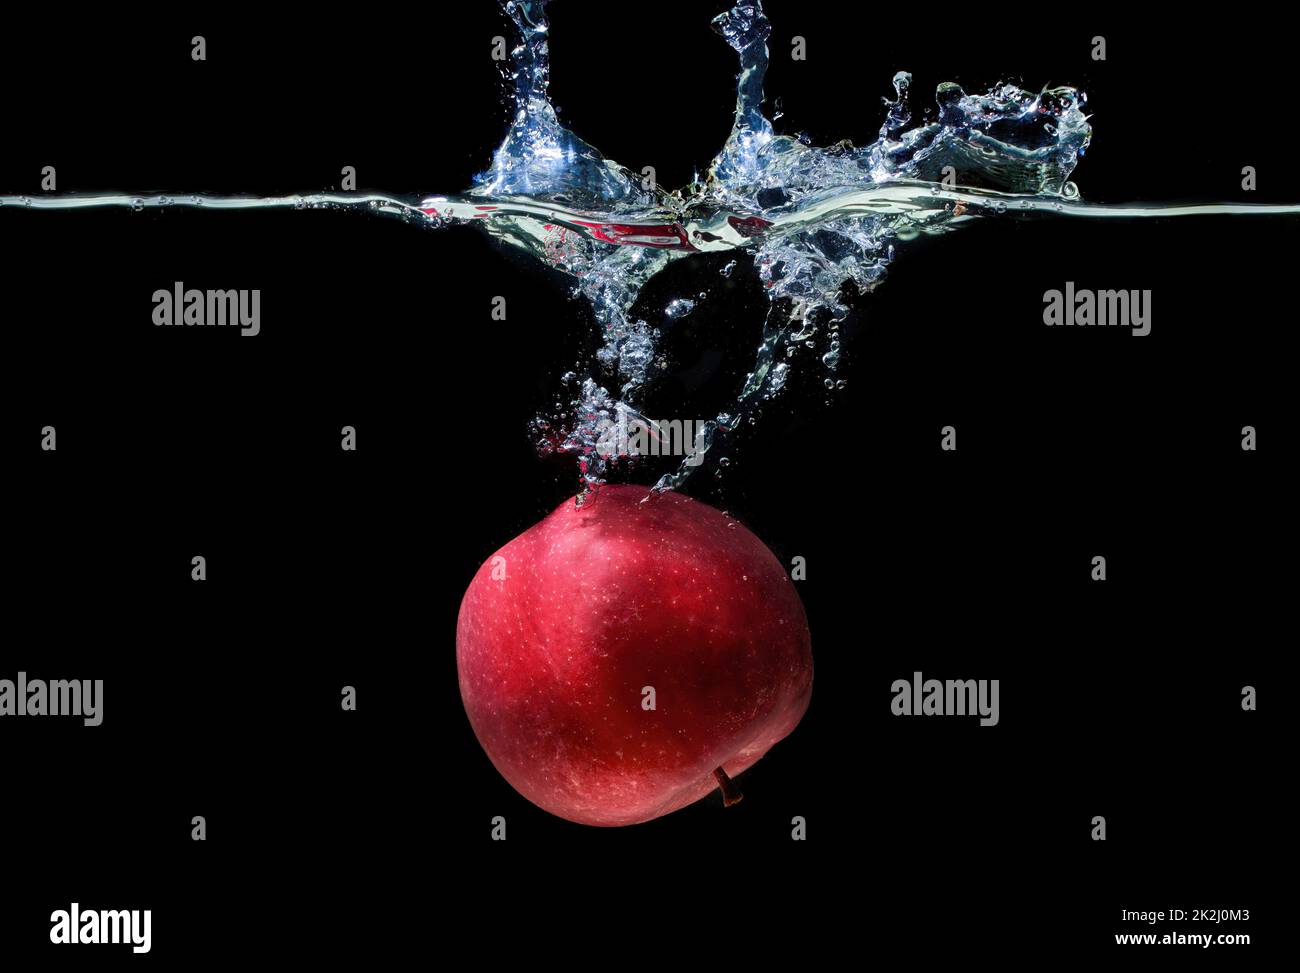 Red apple floating in water with splashes isolated on black background. Stock Photo